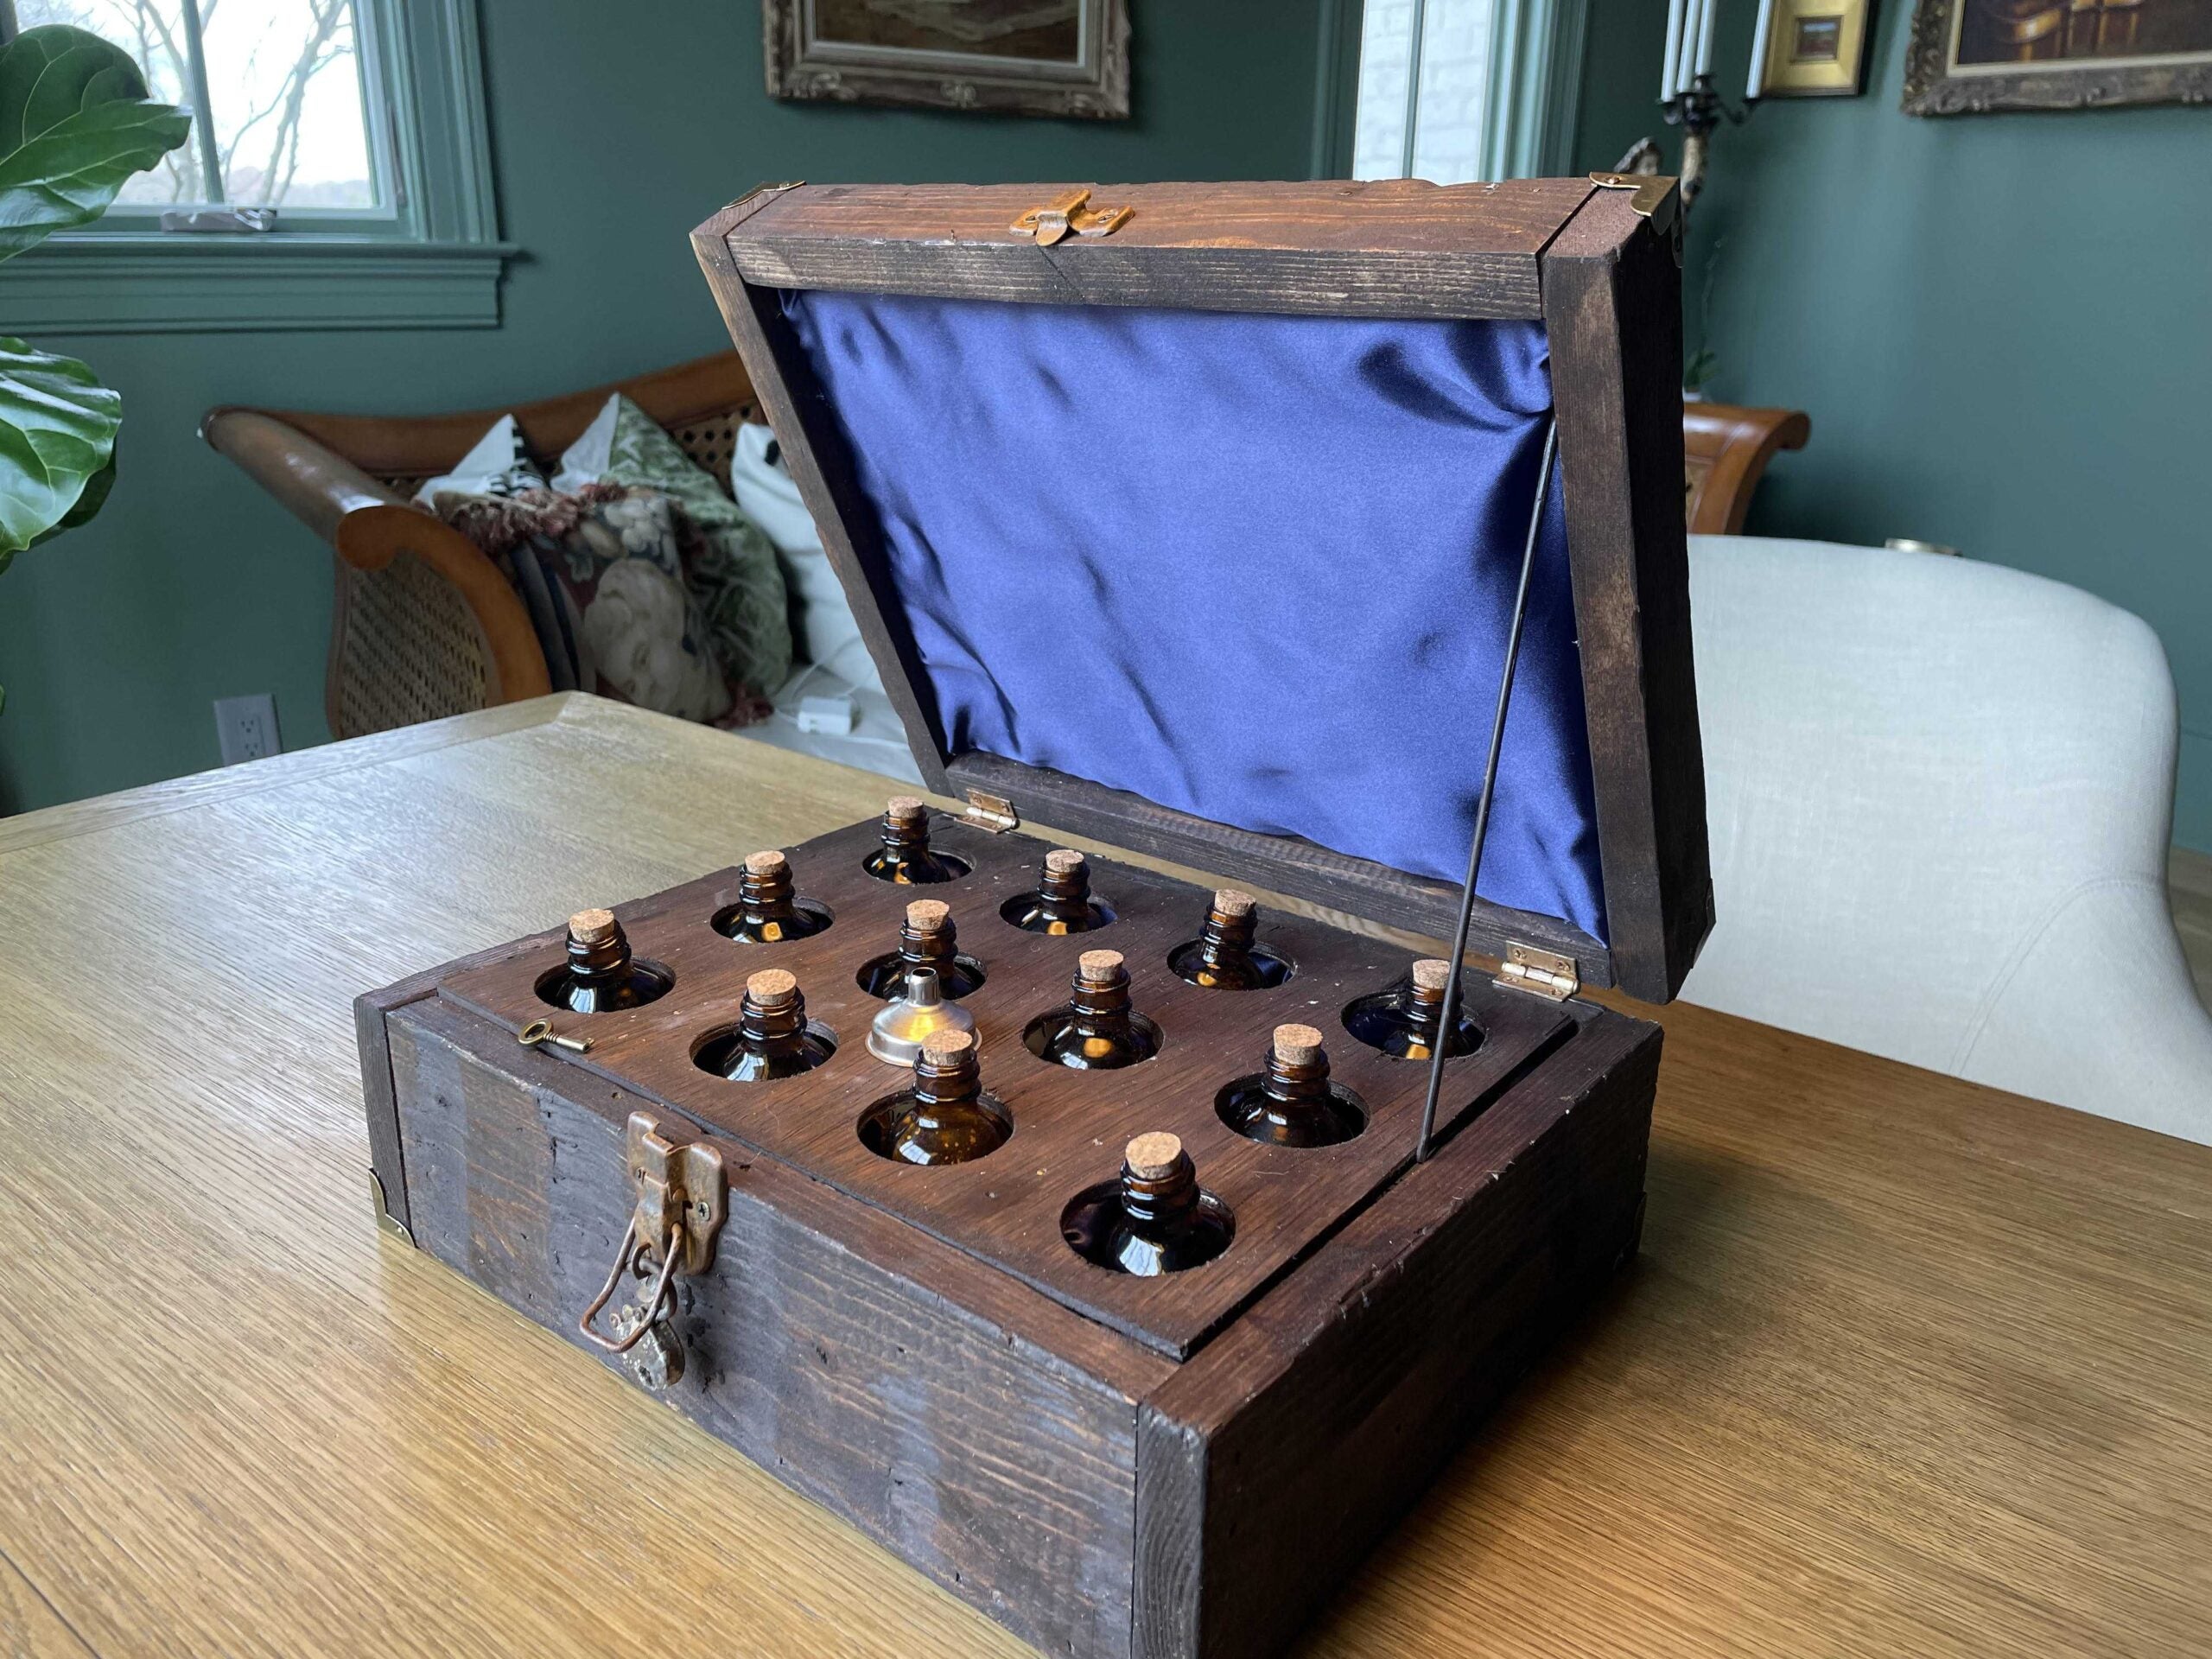 Recreation of an apothecary crate (open), showing a dozen small bottles inside. The top lid is covered by a blue fabric. The crate is on top of a table. There are a sofa and a chair on the background